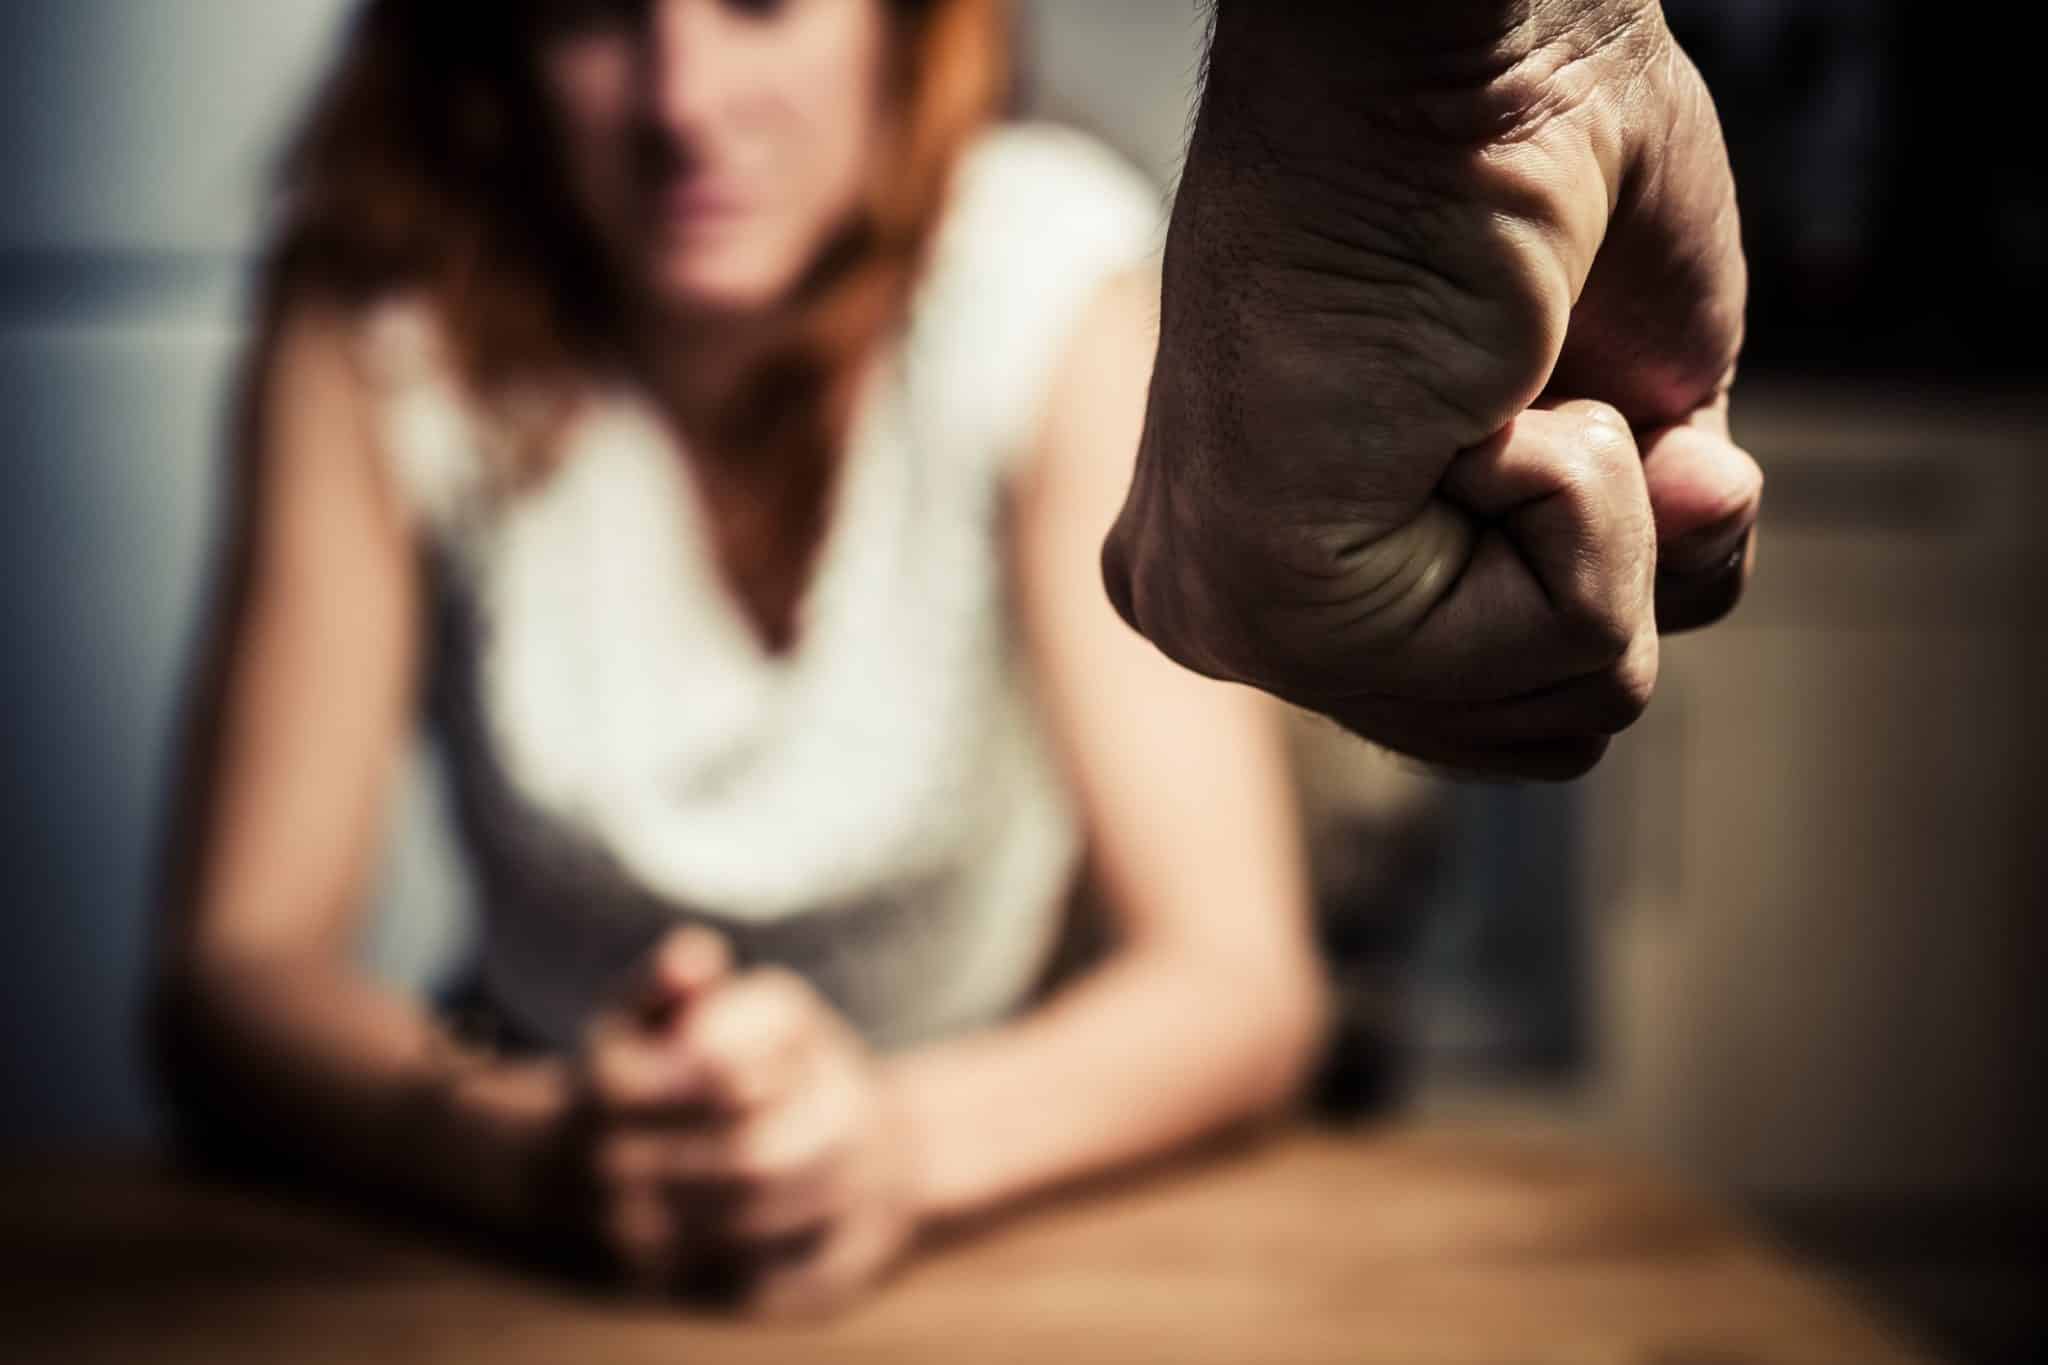 You Can Be Charged If You Interfere with a Report of Domestic Violence in Chicago